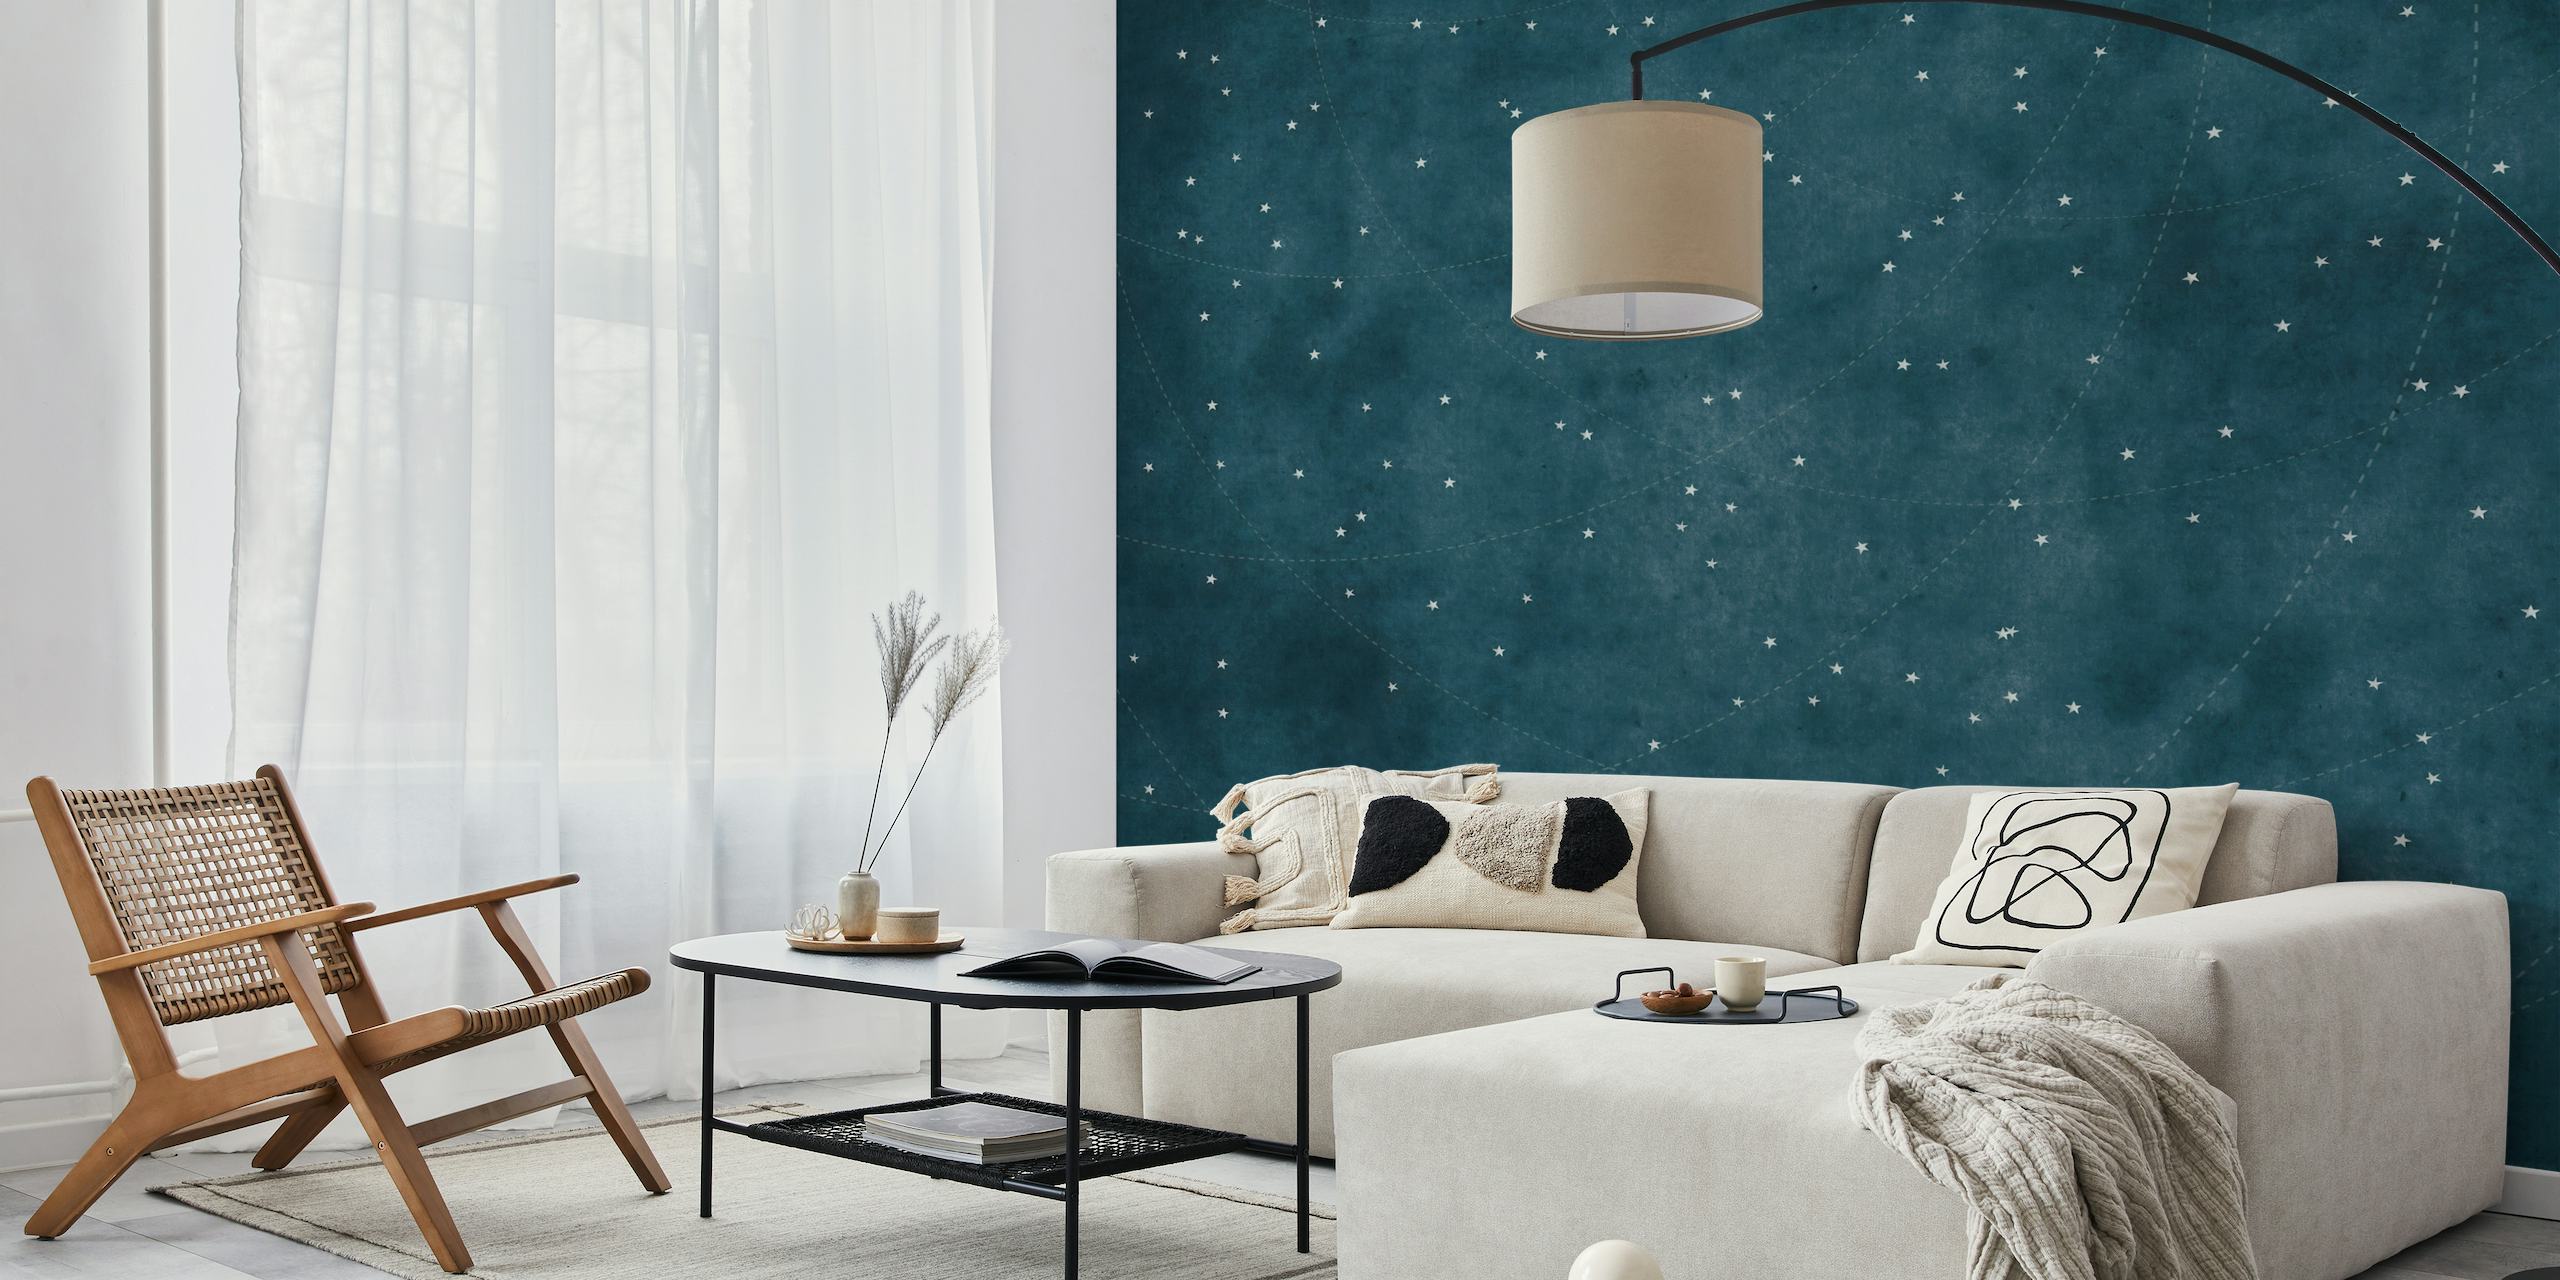 Starry night sky wall mural with tiny white stars on a midnight blue background